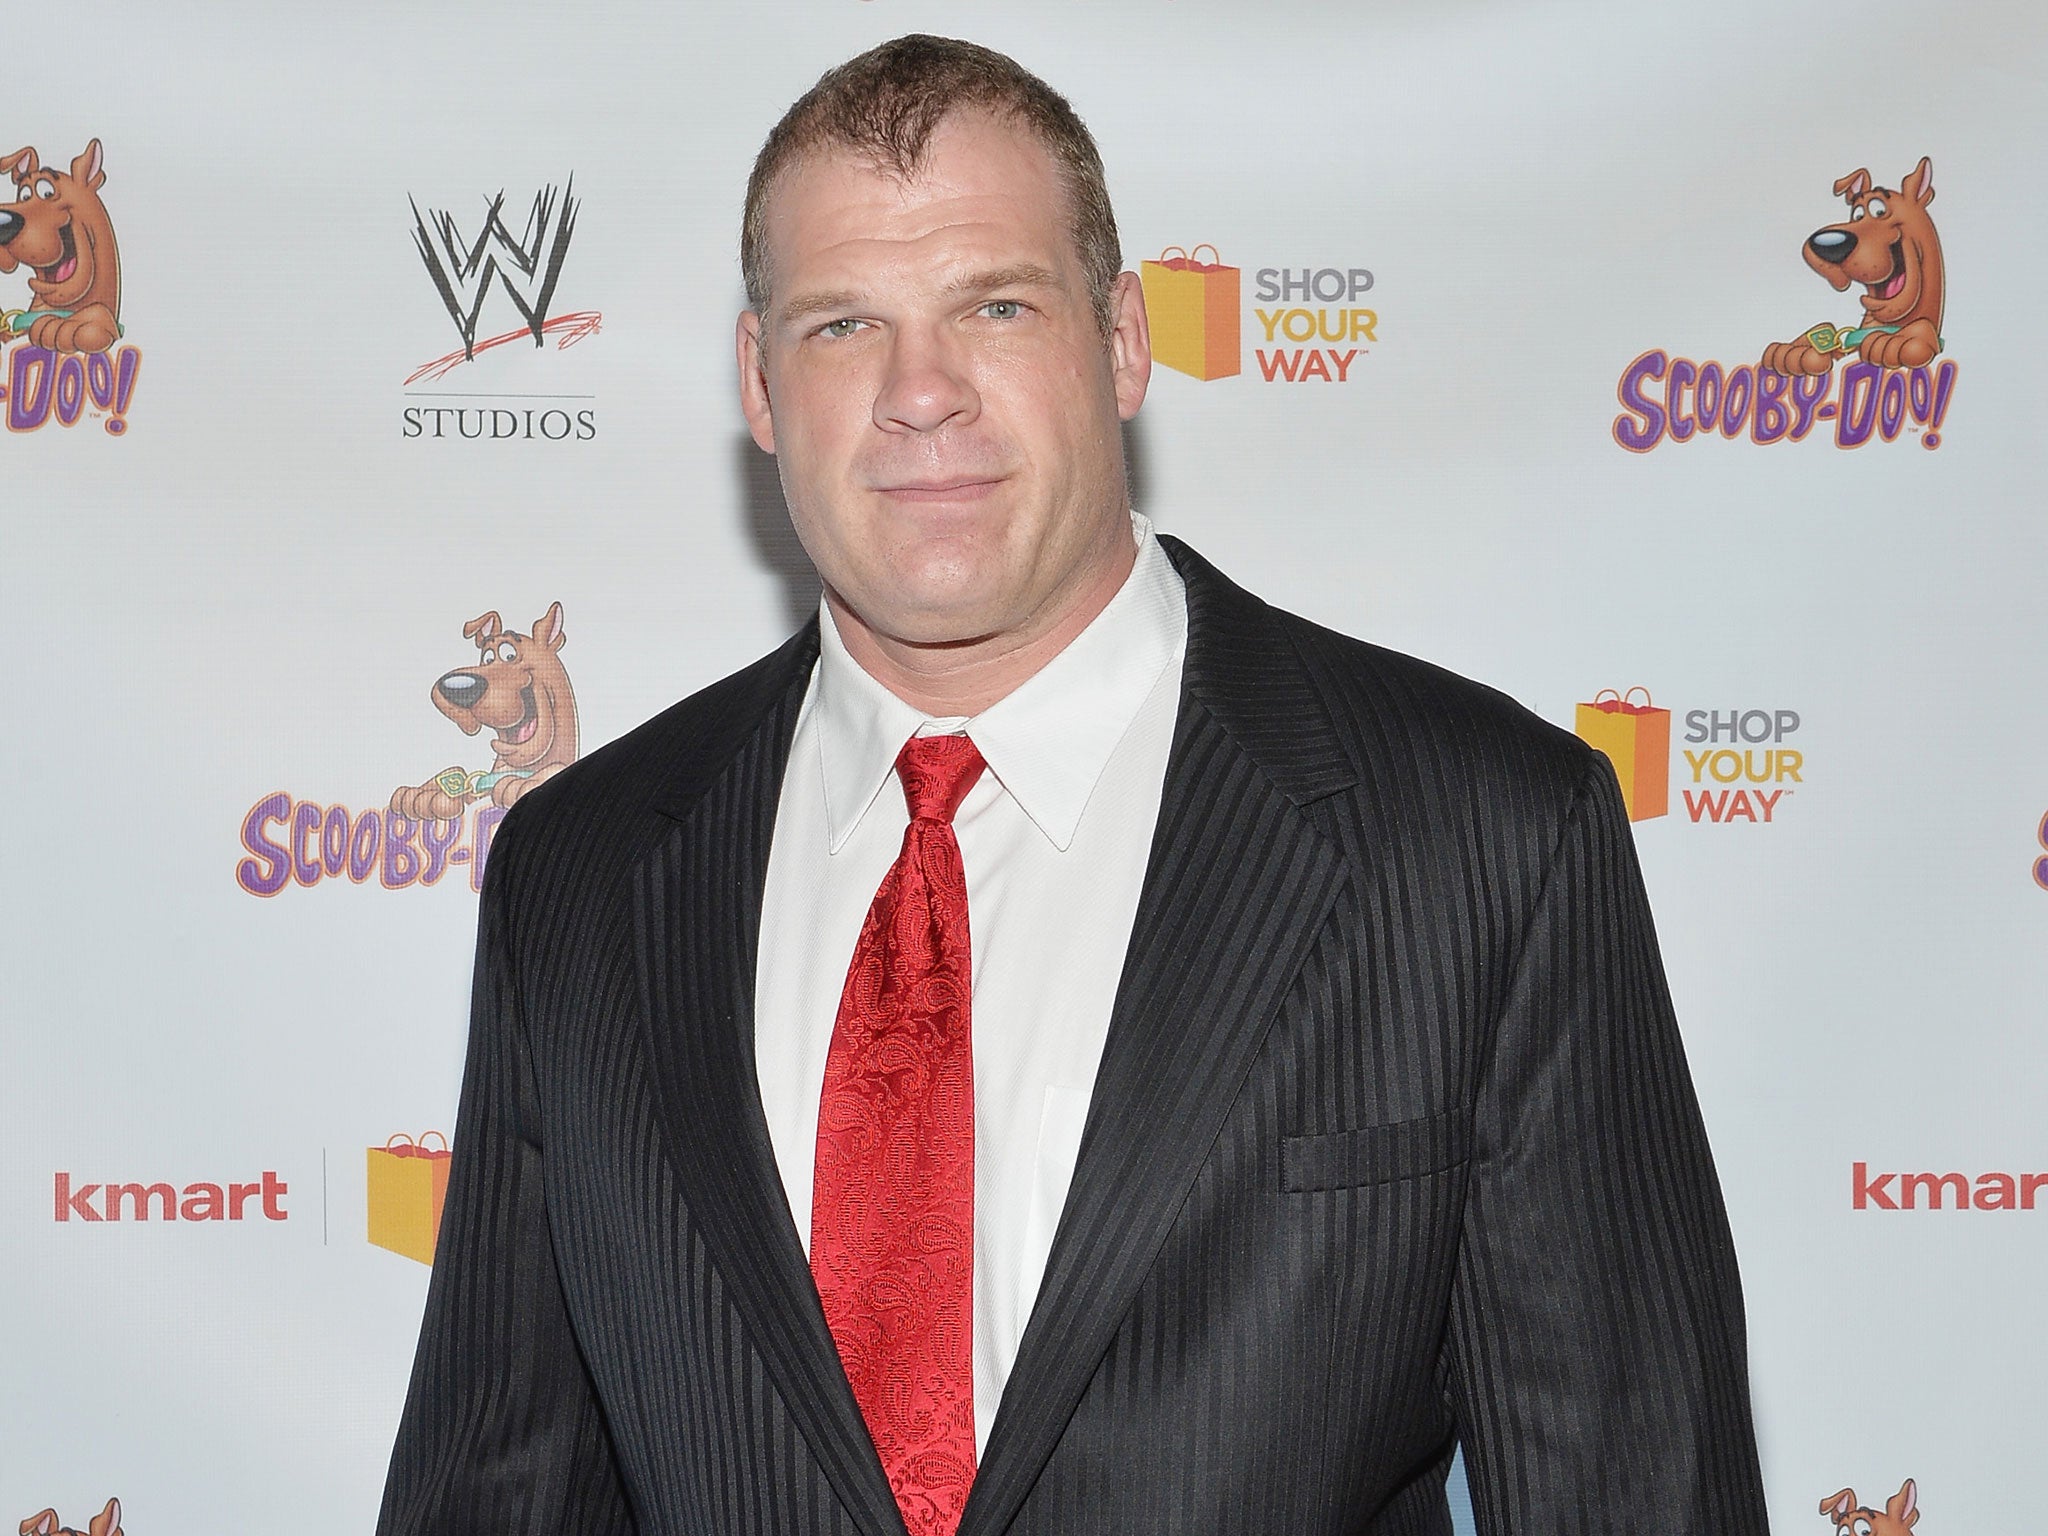 WWE superstar Kane is running to be mayor of Knox County